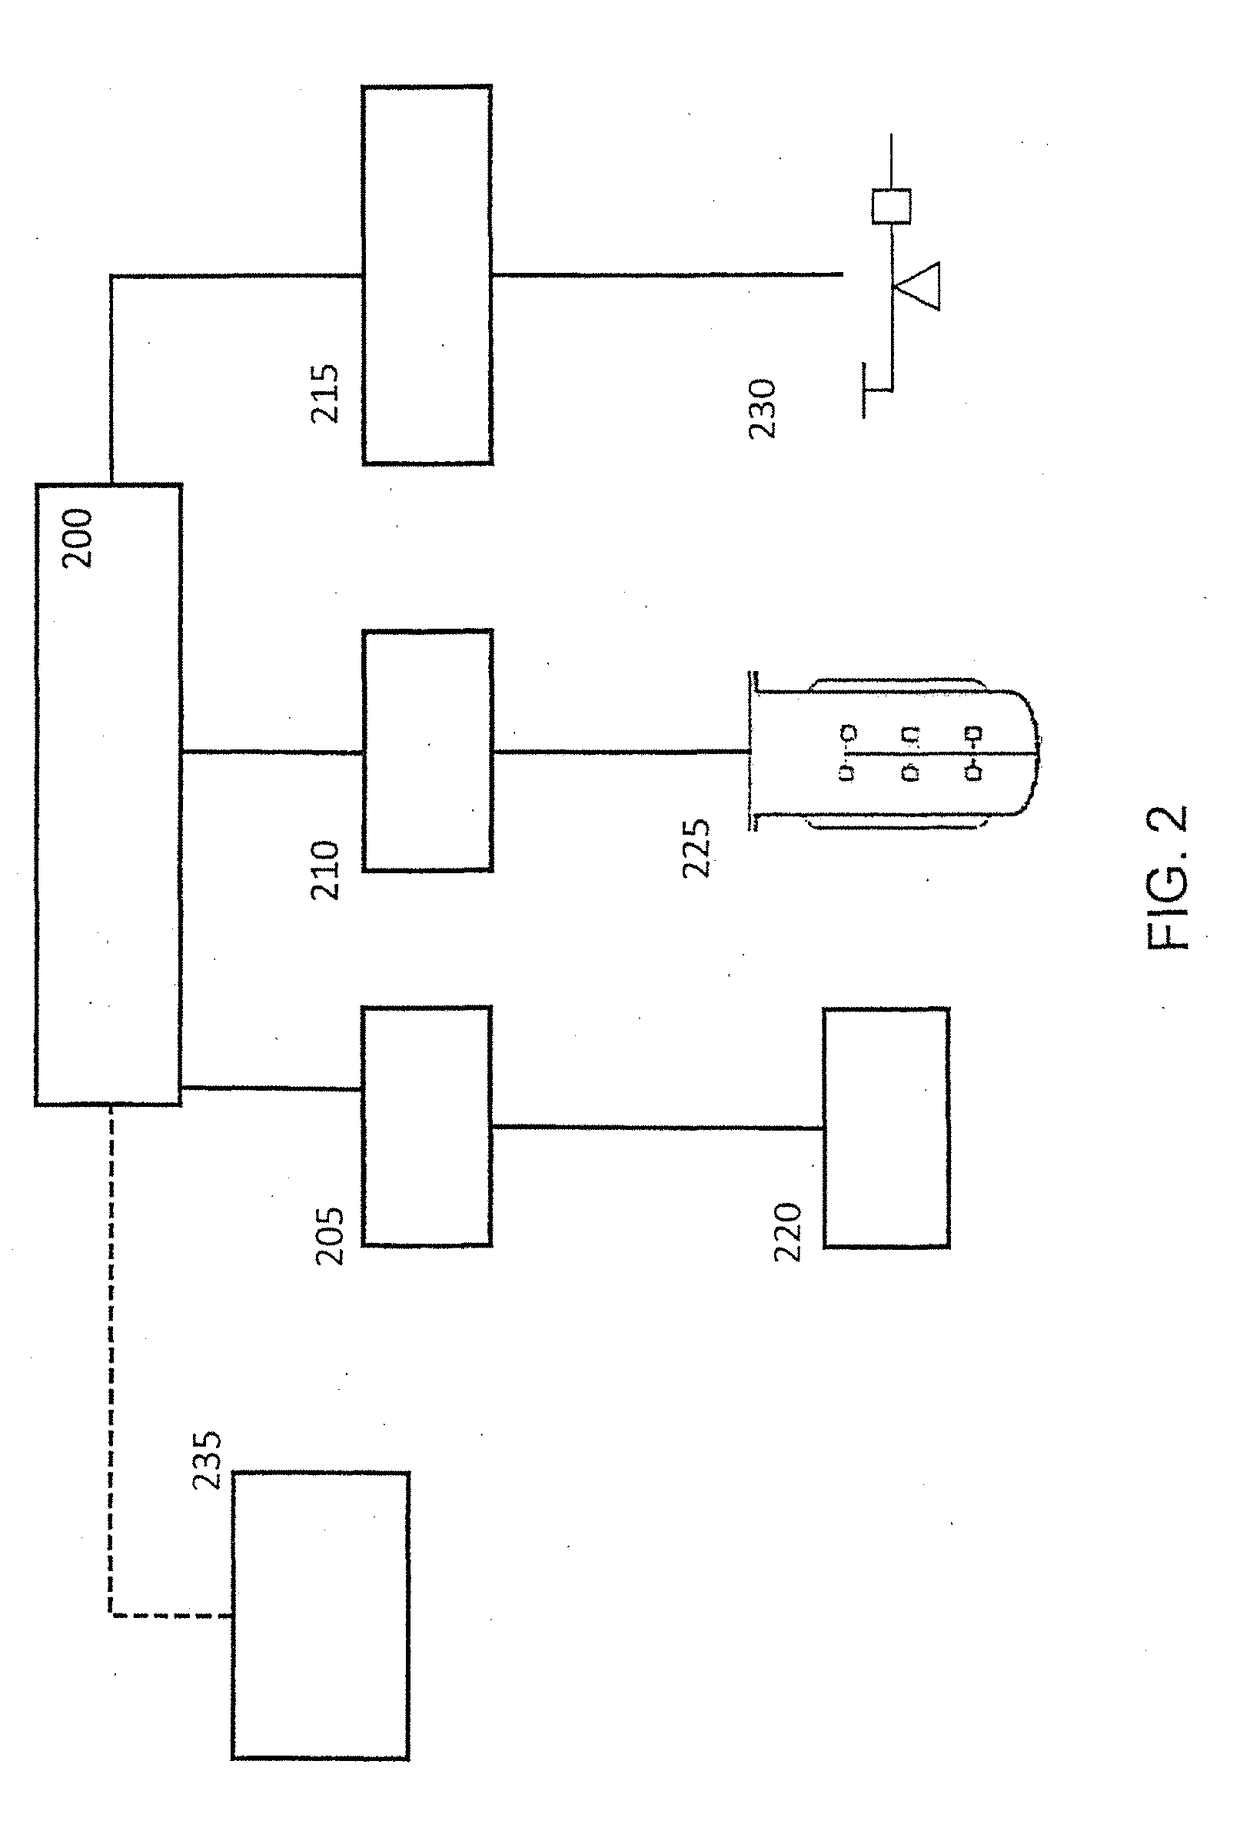 System, method, computer program product and user interface for controlling, detecting, regulating and/or analyzing biological, biochemical, chemical and/or physical processes